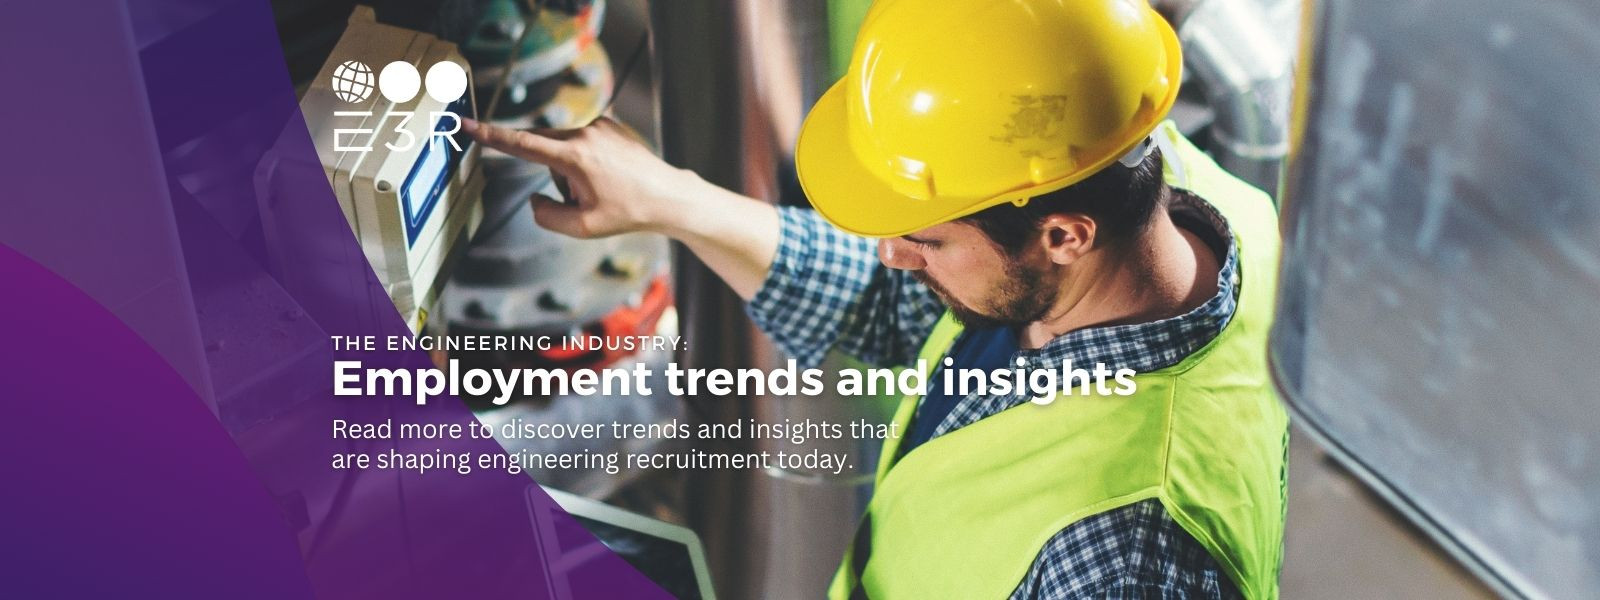 Engineering Recruitment: Trends, insights and opportunities